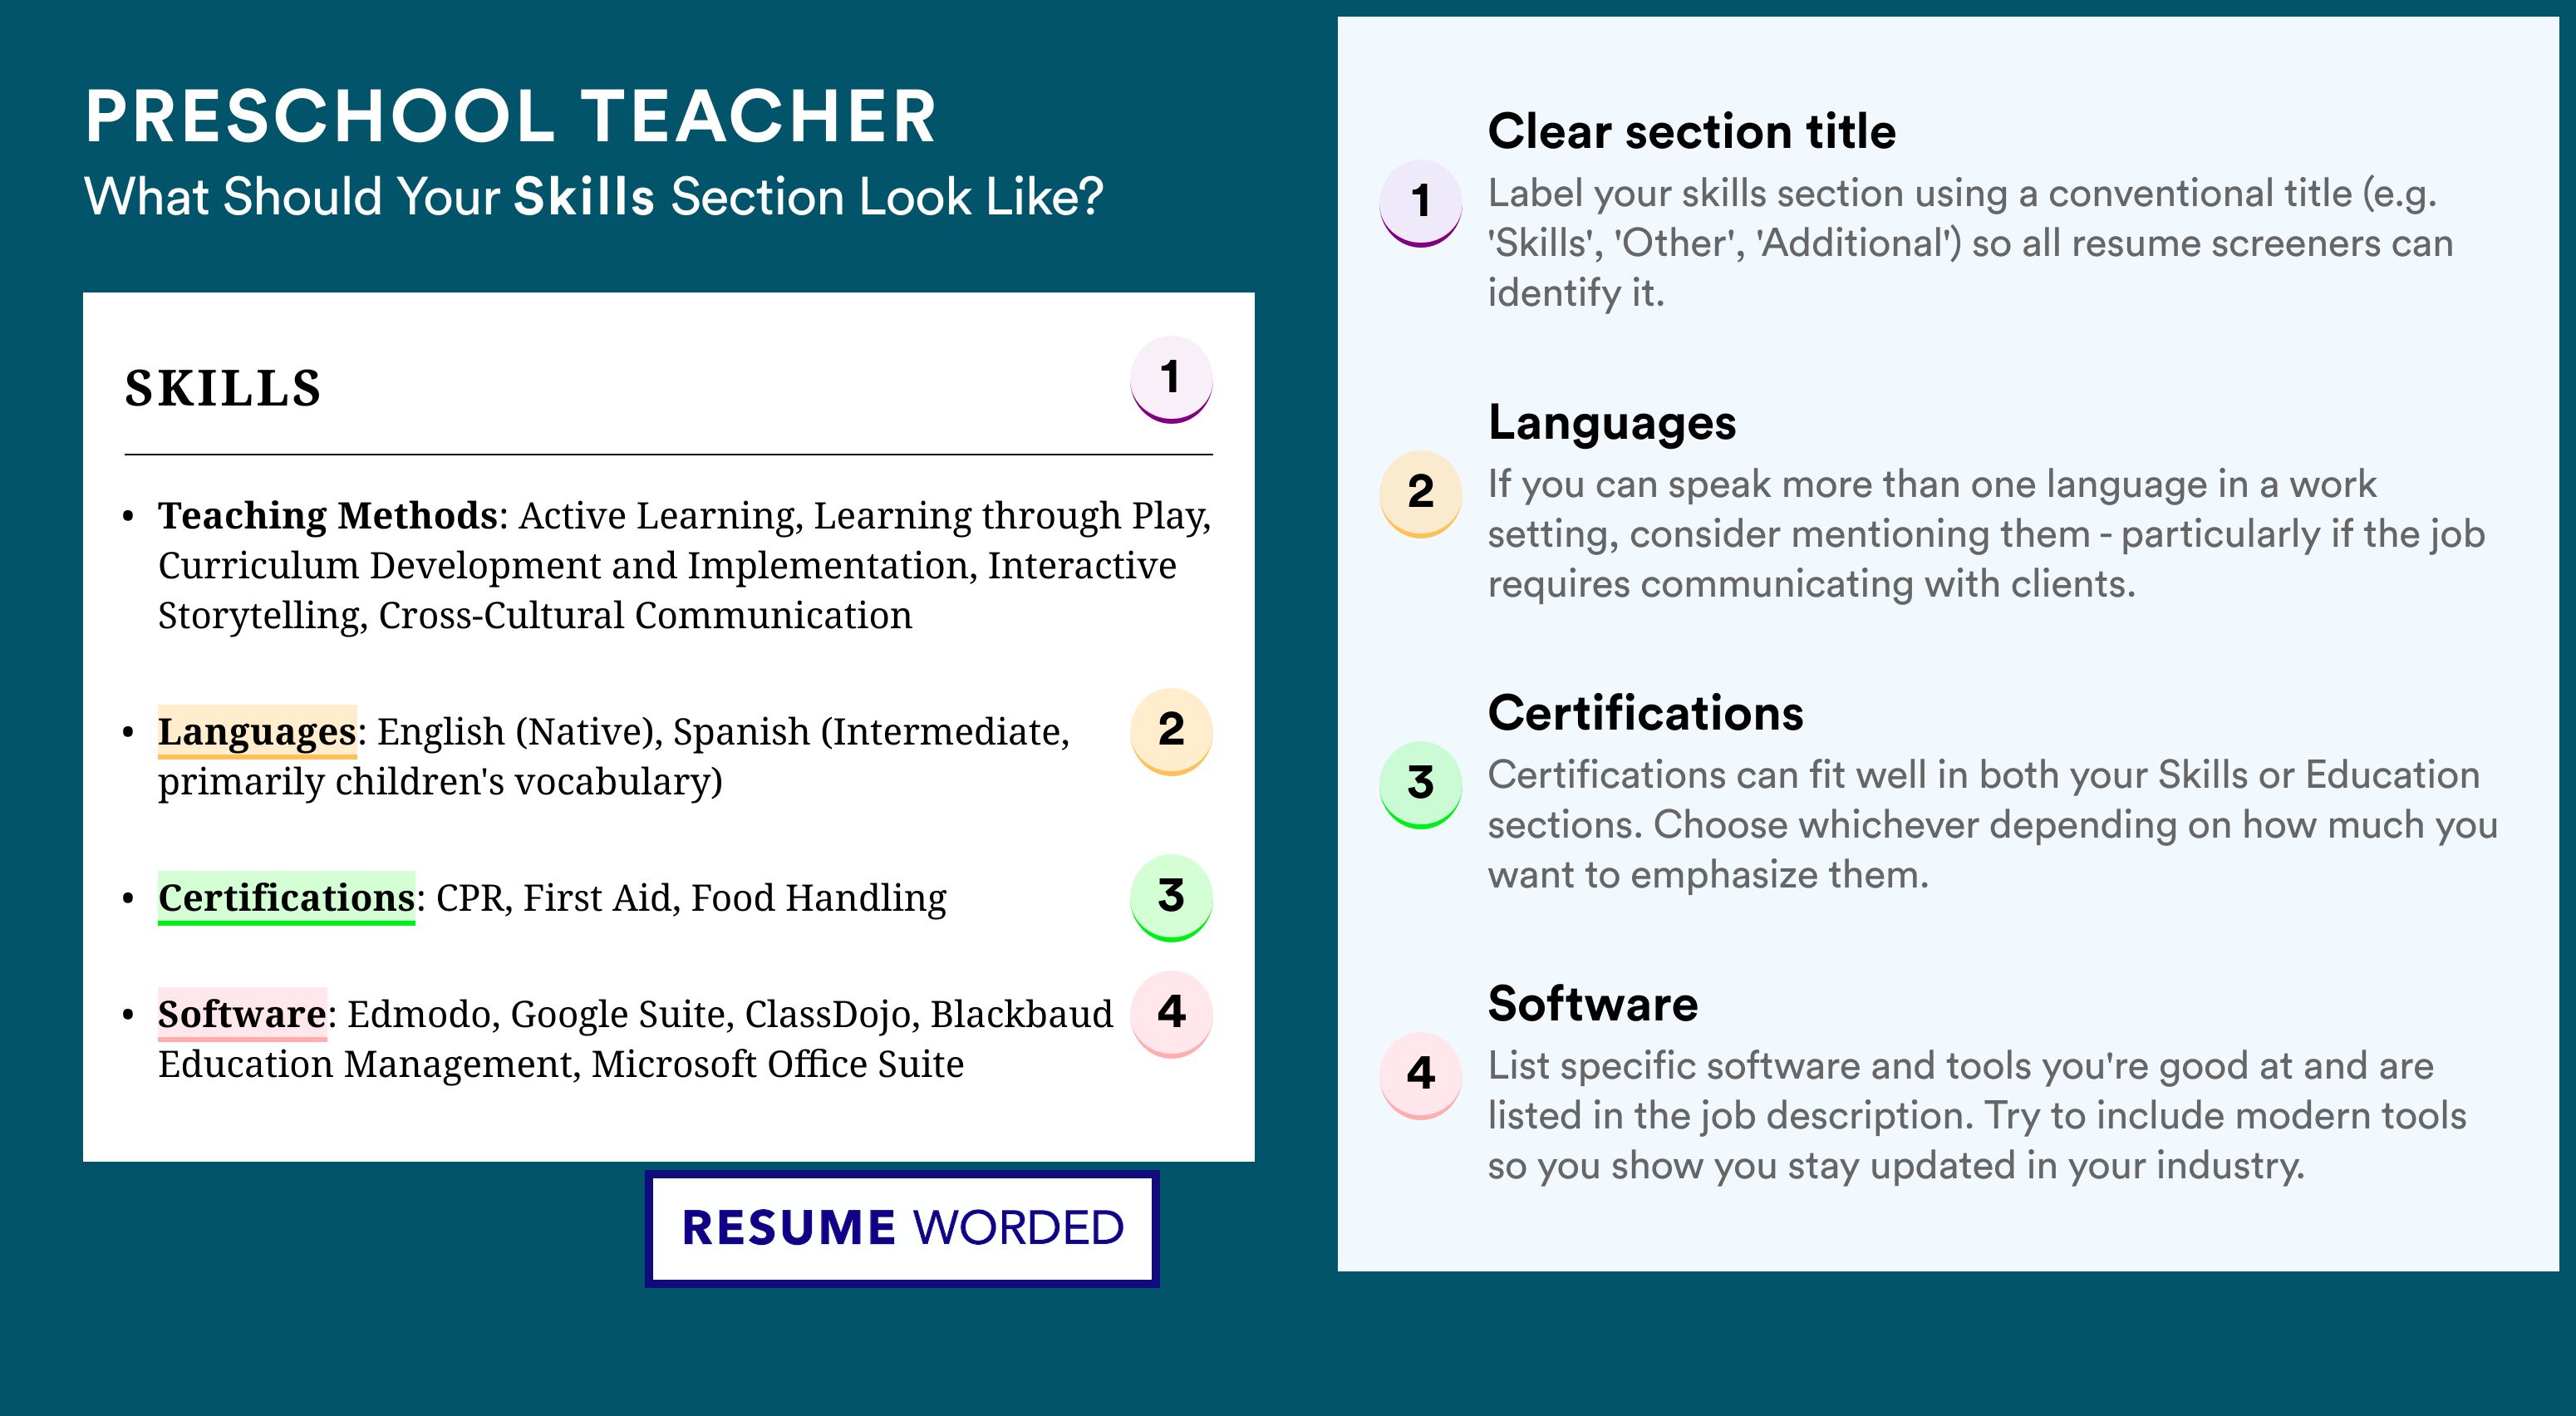 How To Write Your Skills Section - Preschool Teacher Roles